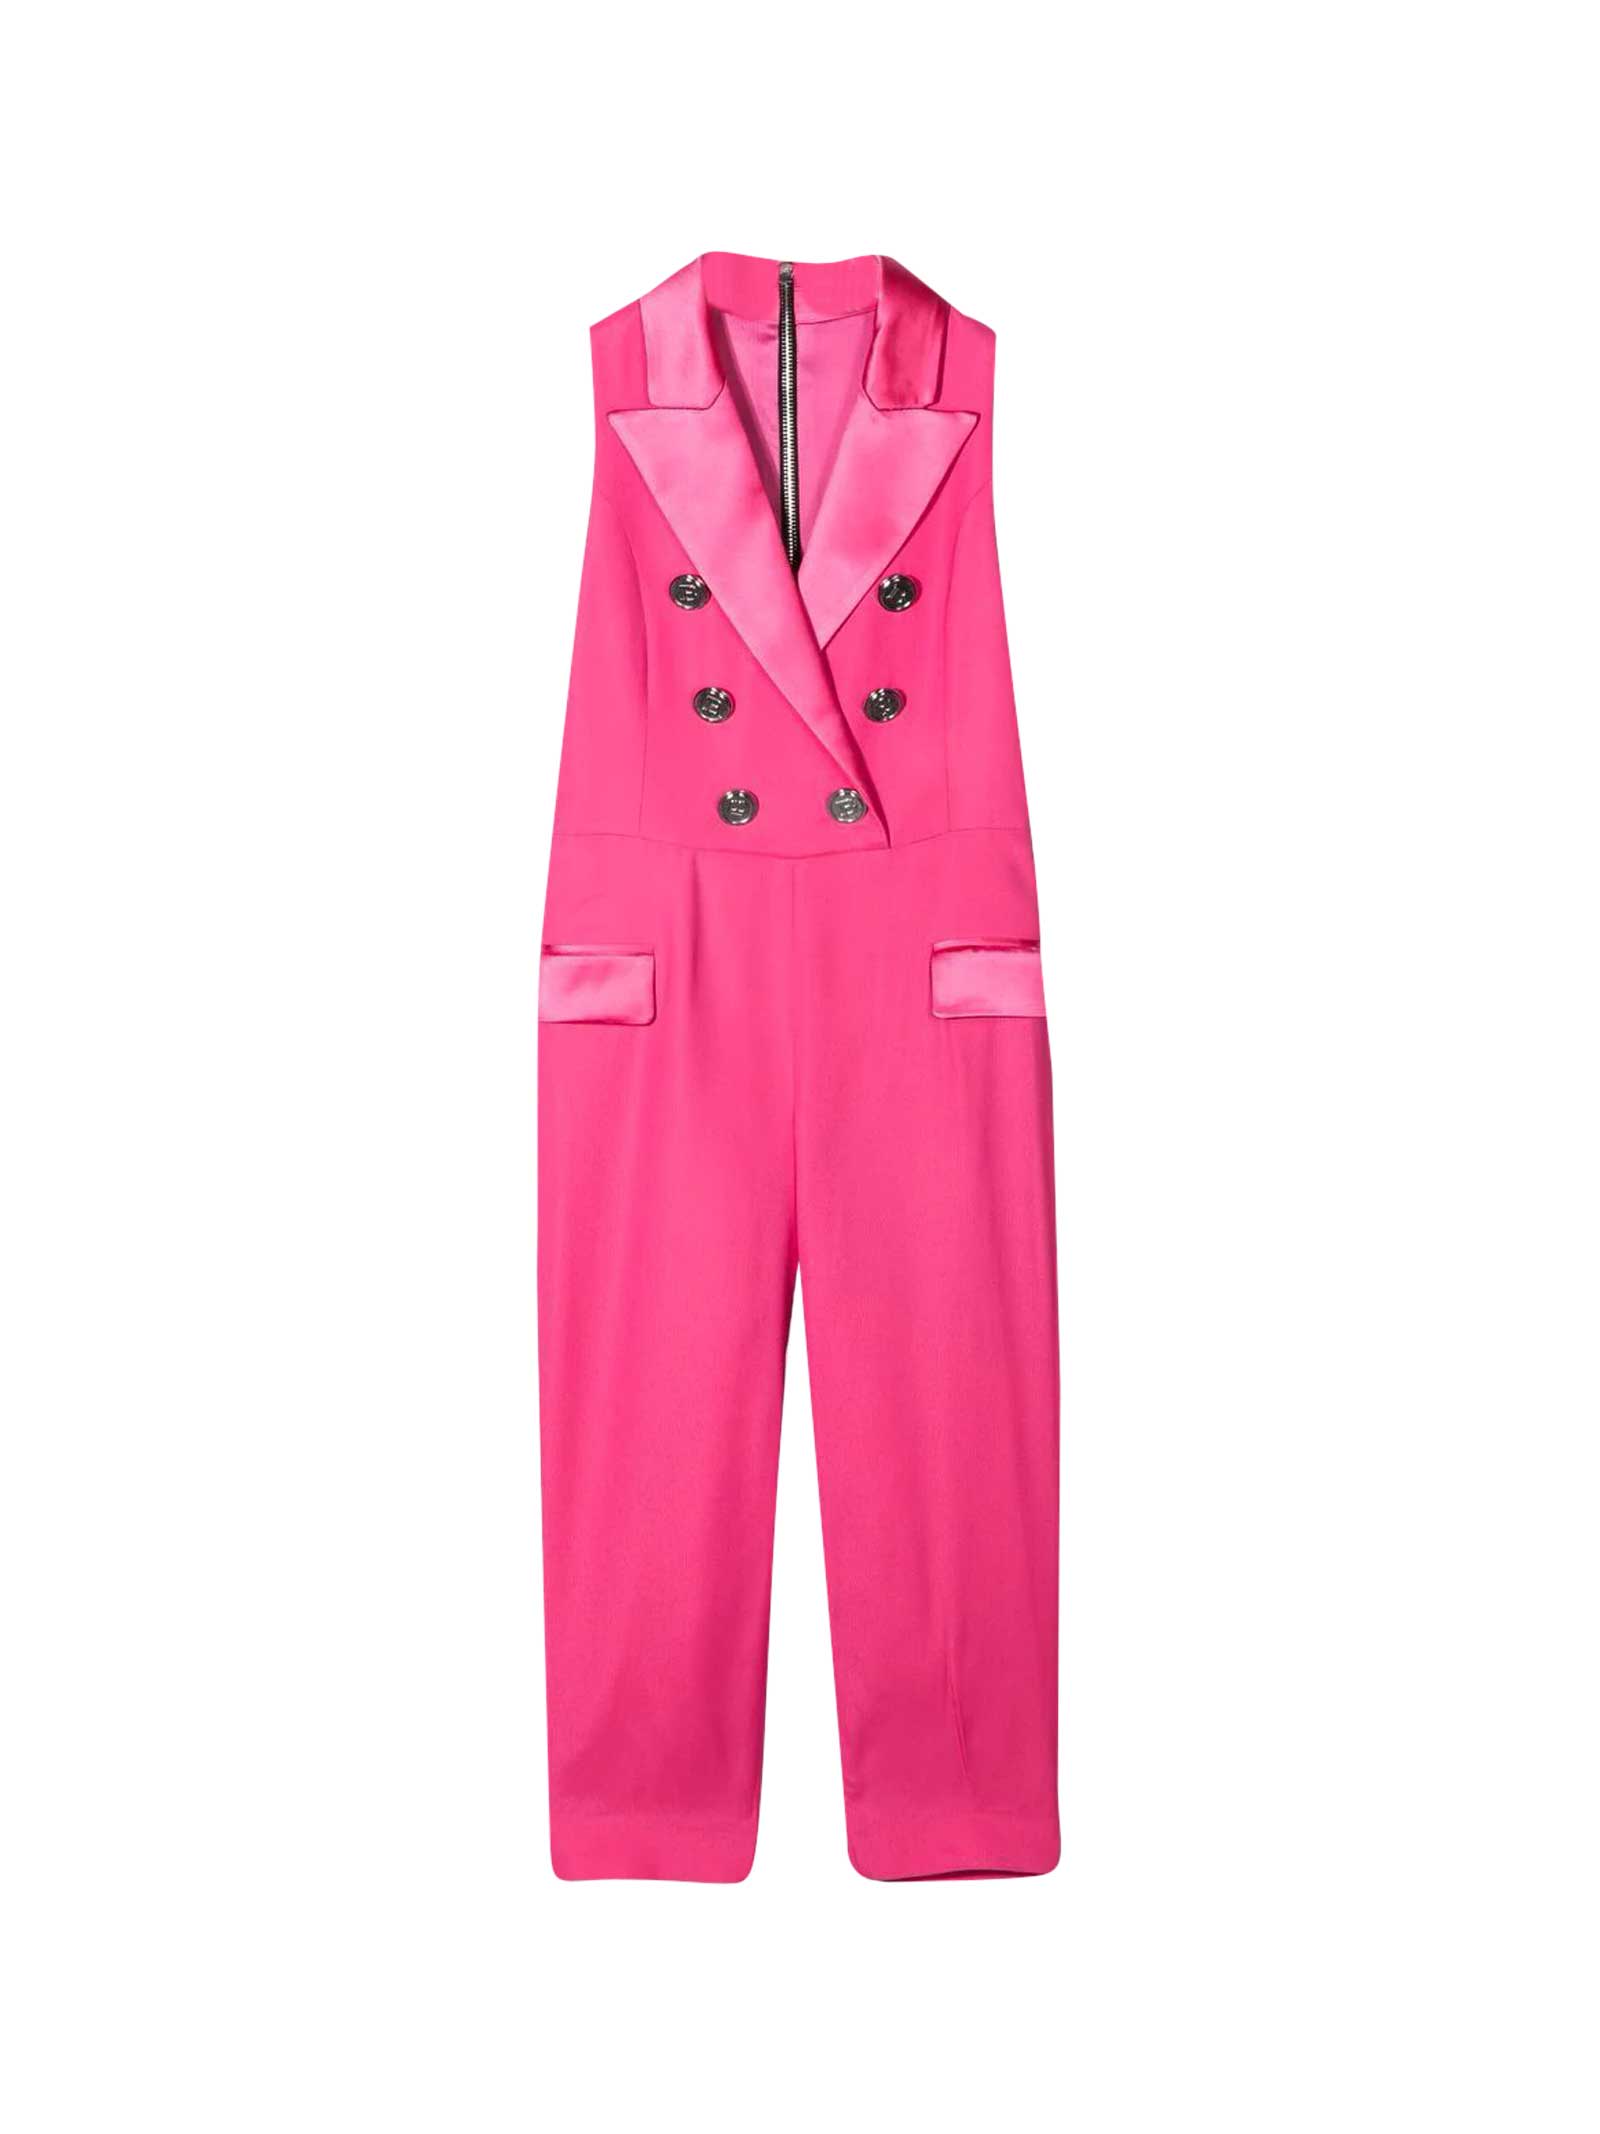 BALMAIN ONE-PIECE DOUBLE-BREASTED SUIT,6O1342OD940 513T